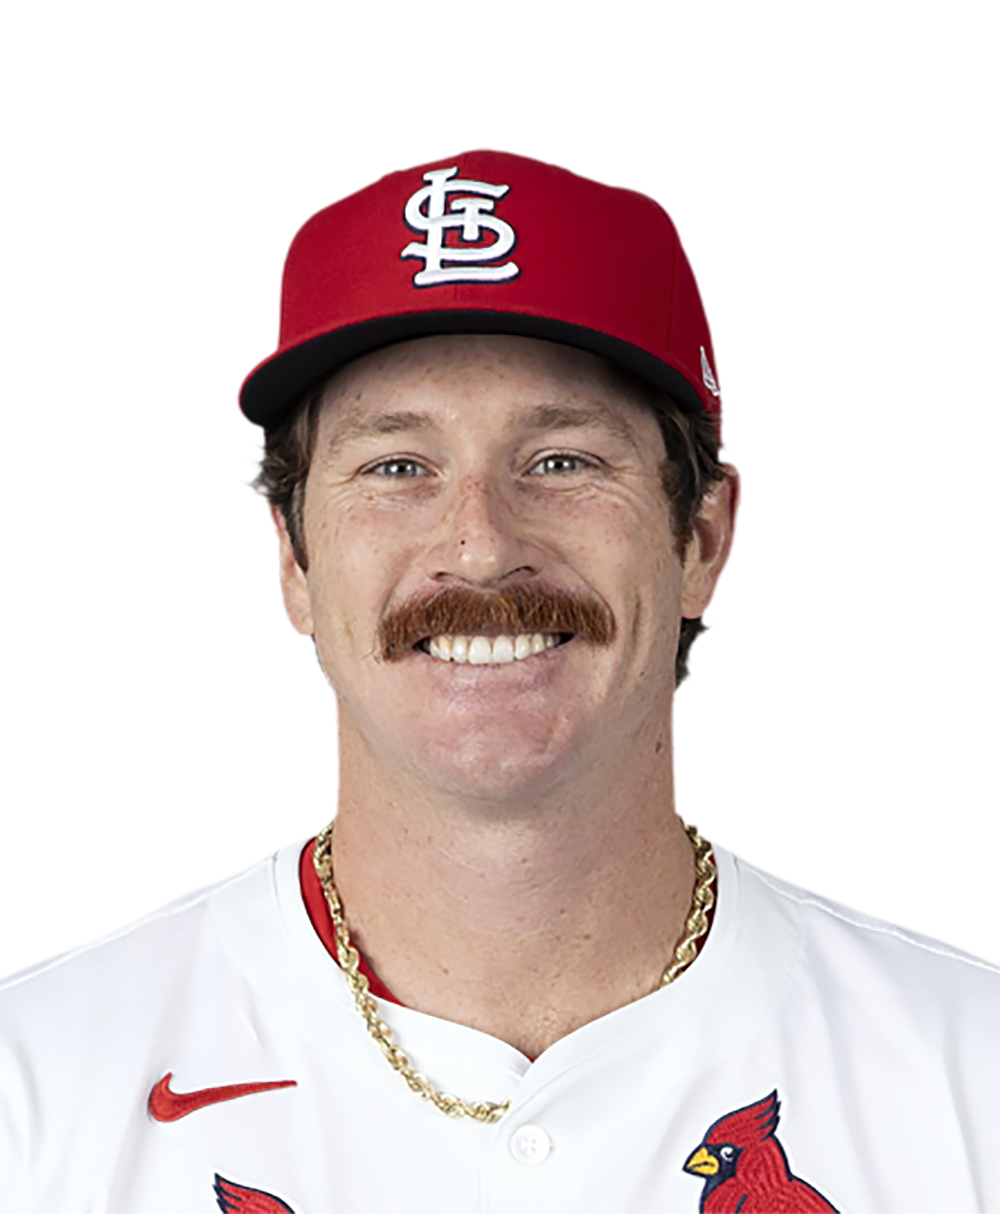 Miles Mikolas on whether he's going to grow his mustache back